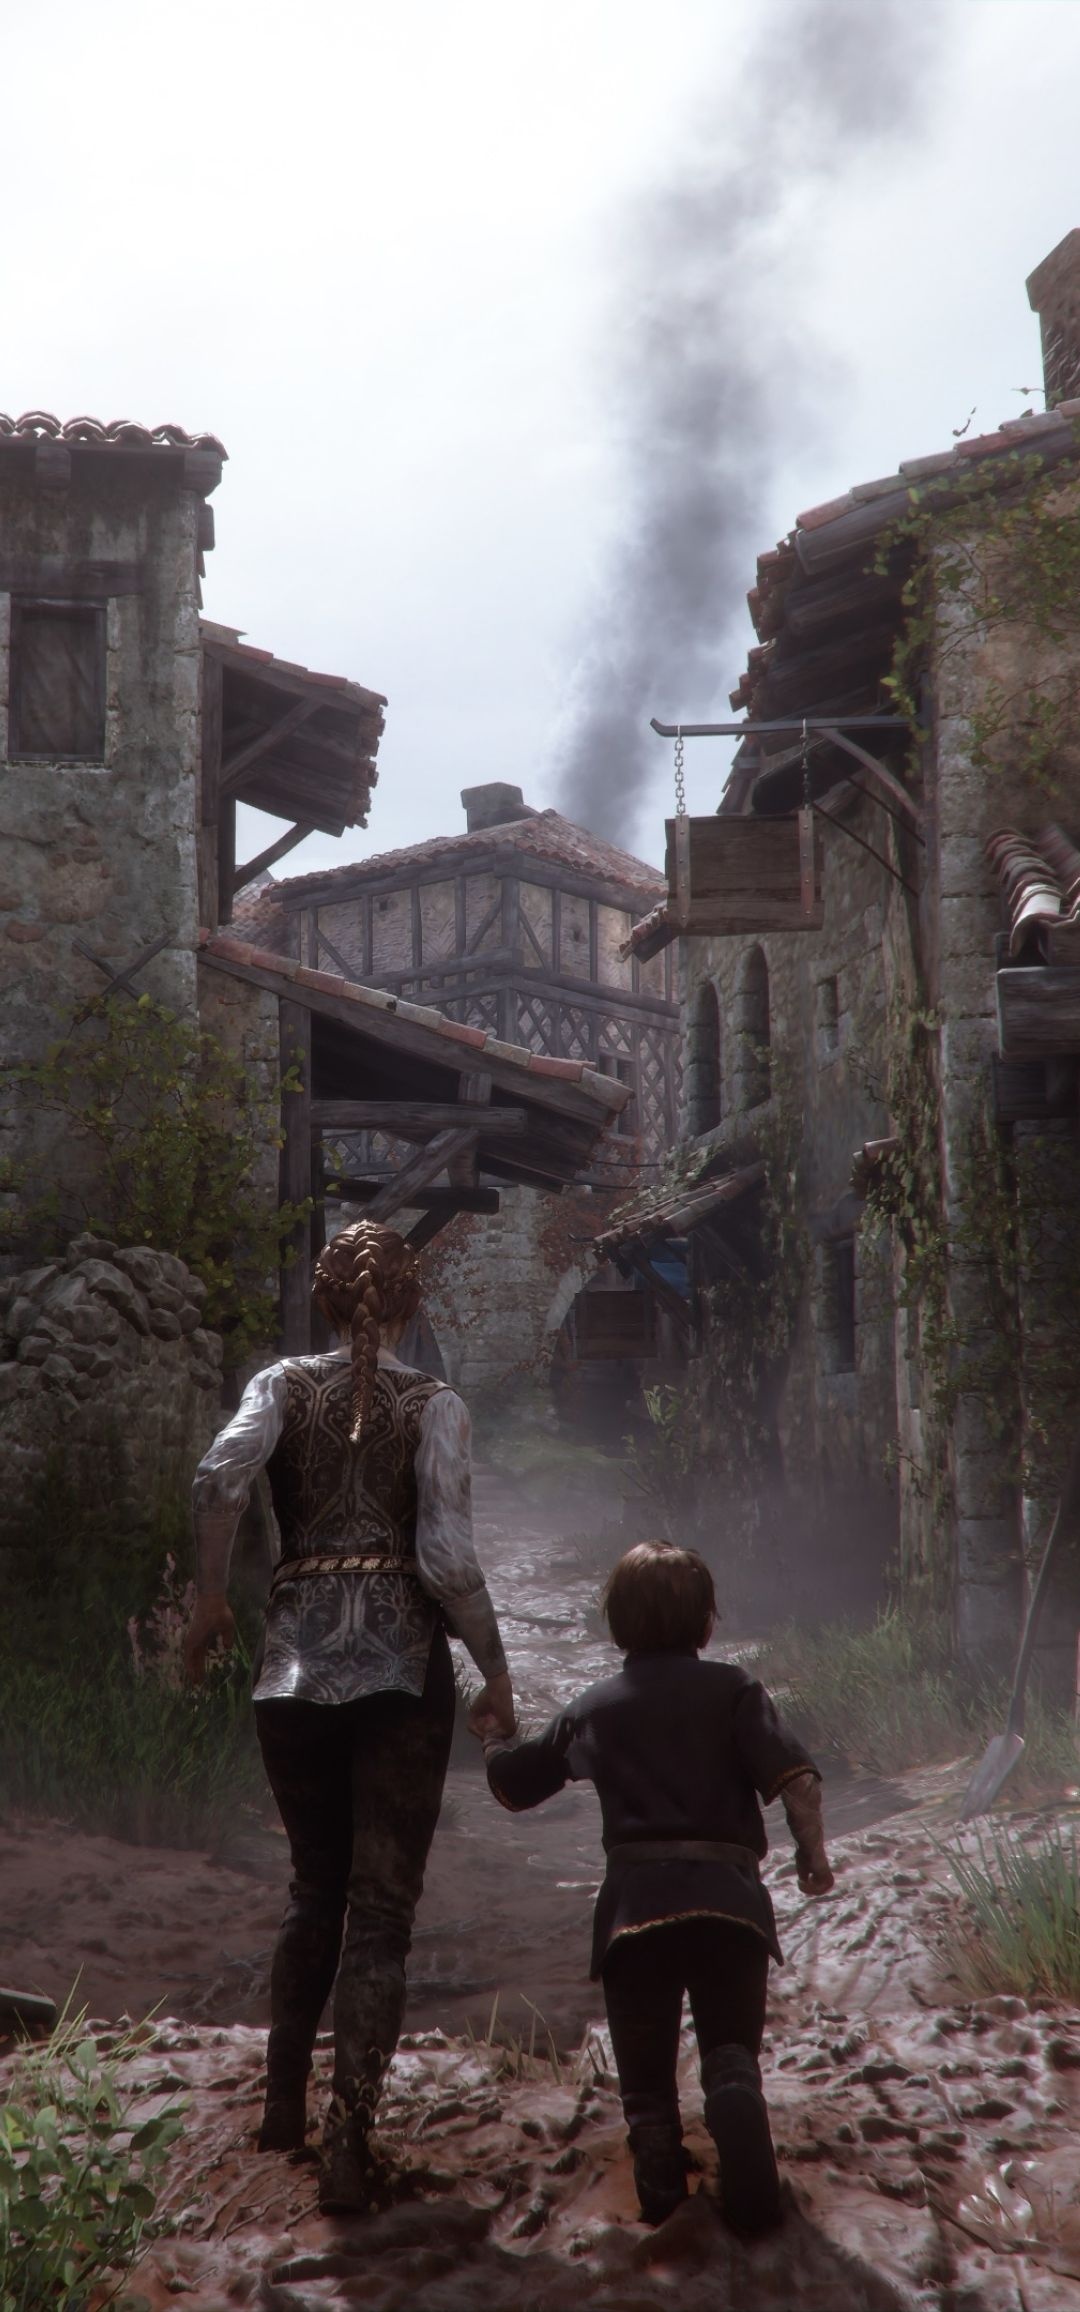 A Plague Tale: Requiem: Innocence, Facing against soldiers from the French Inquisition and hordes of rats. 1080x2320 HD Wallpaper.